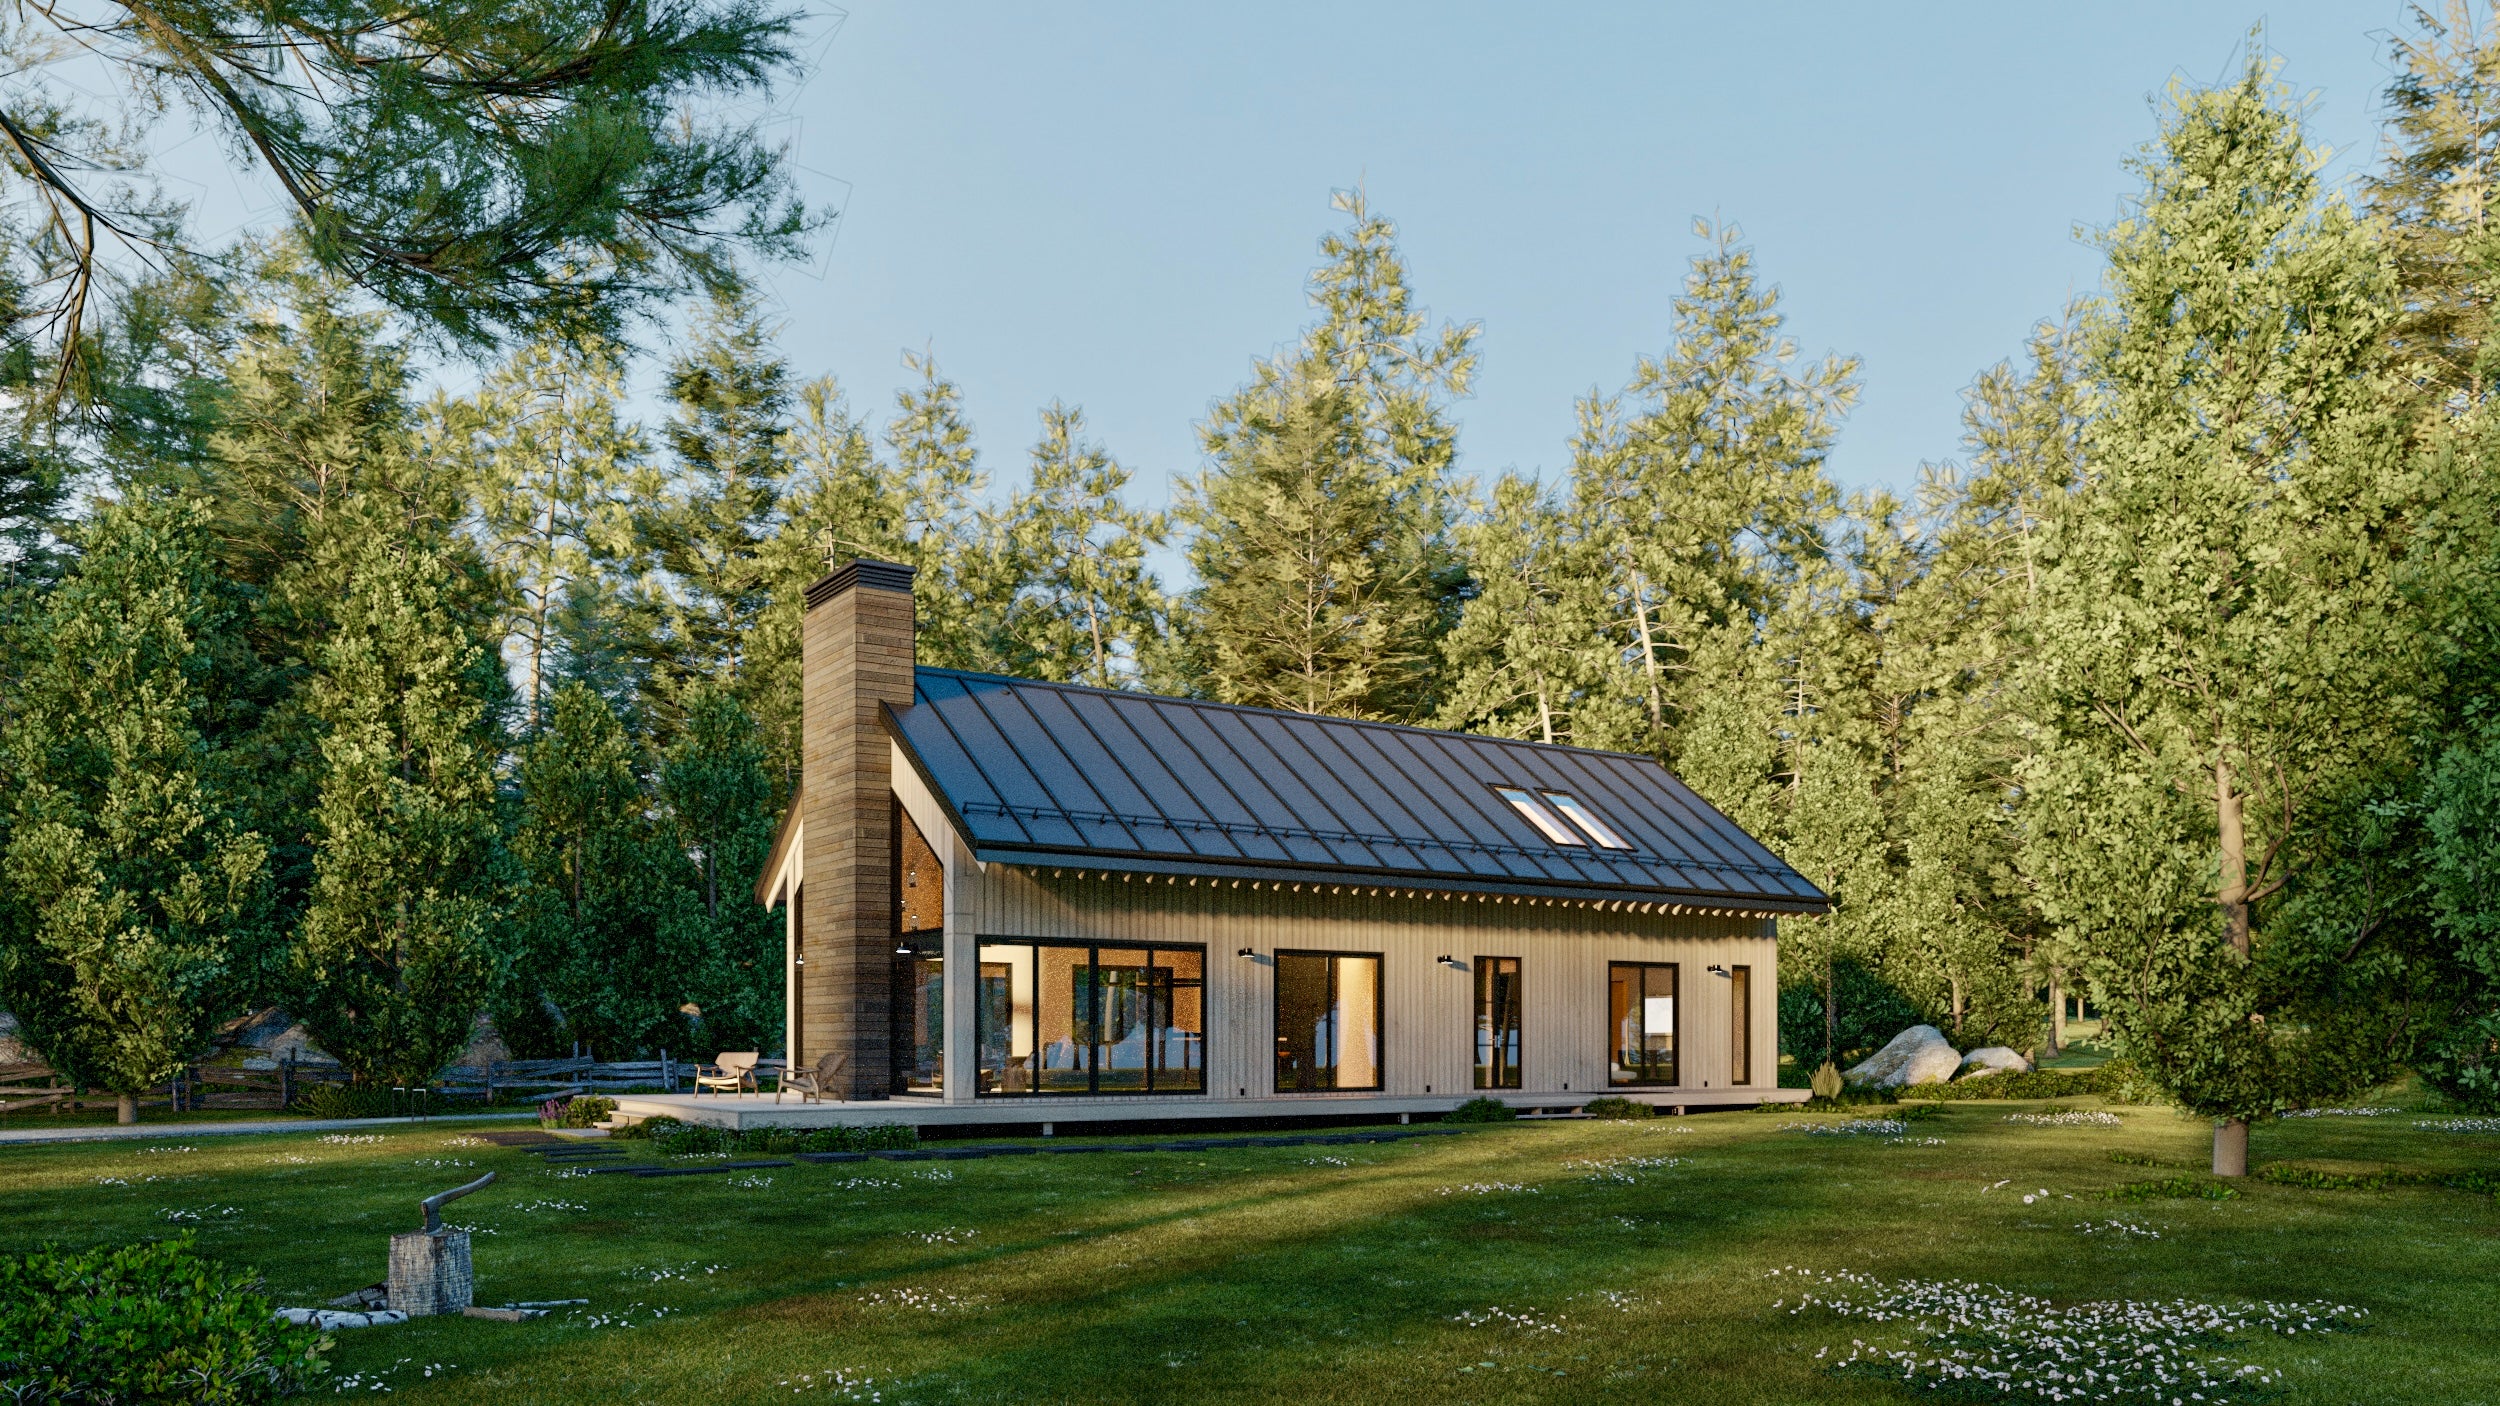 Two-bedroom cabin with a beautiful shower, perfect for outdoor living and Airbnb projects. Our custom and pre-designed floor plans are cheaper than local architects